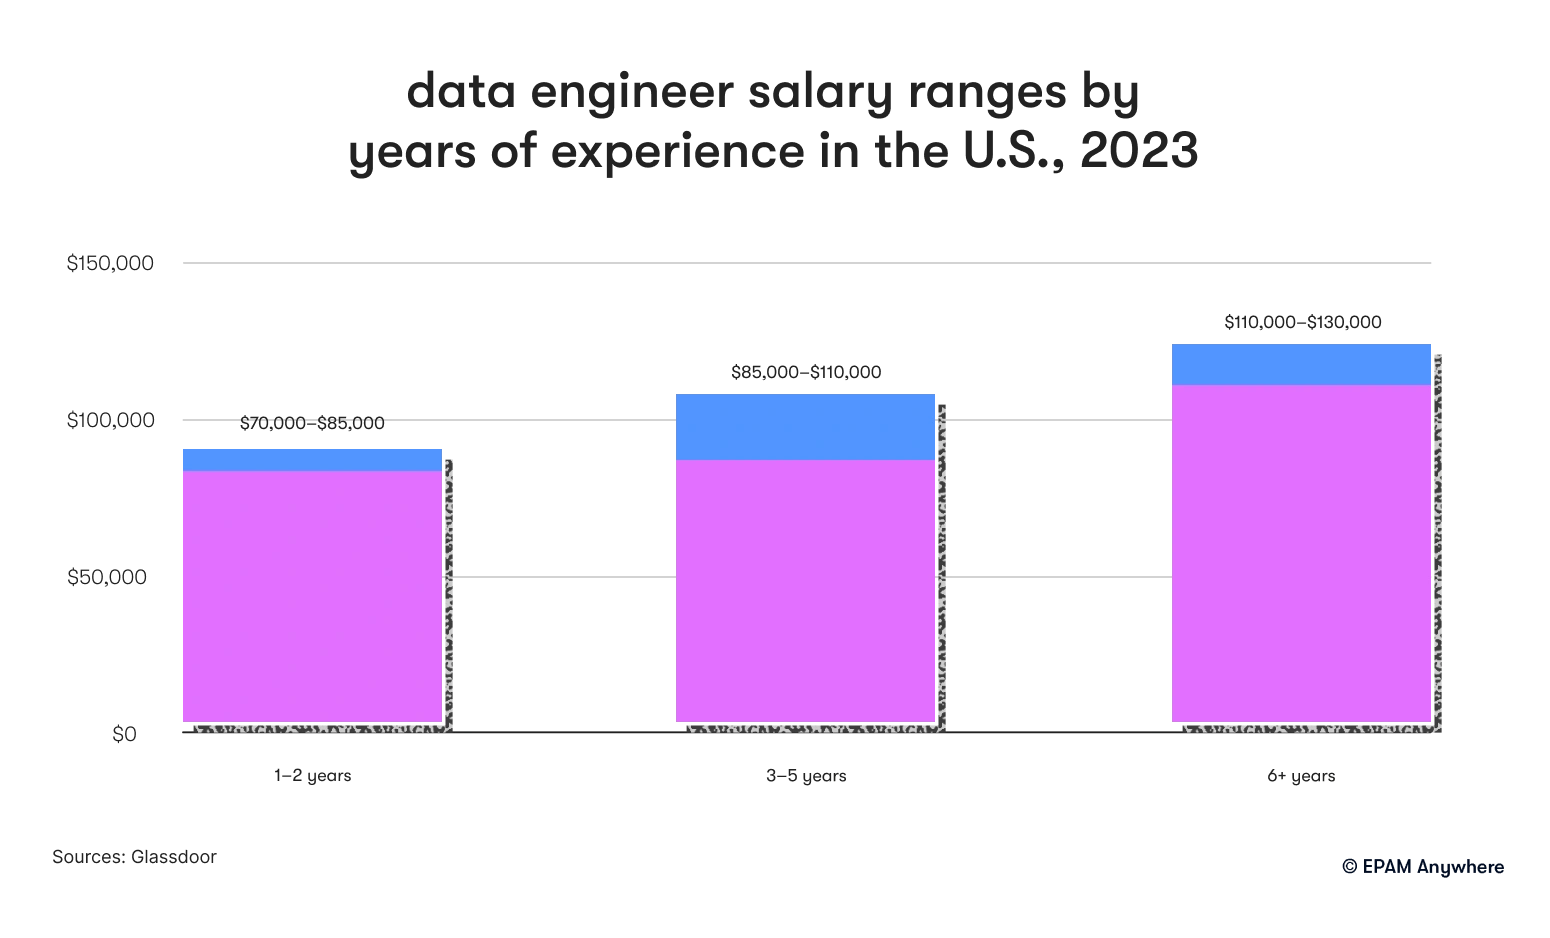 data engineer salary ranges by years of experience in the US, 2023